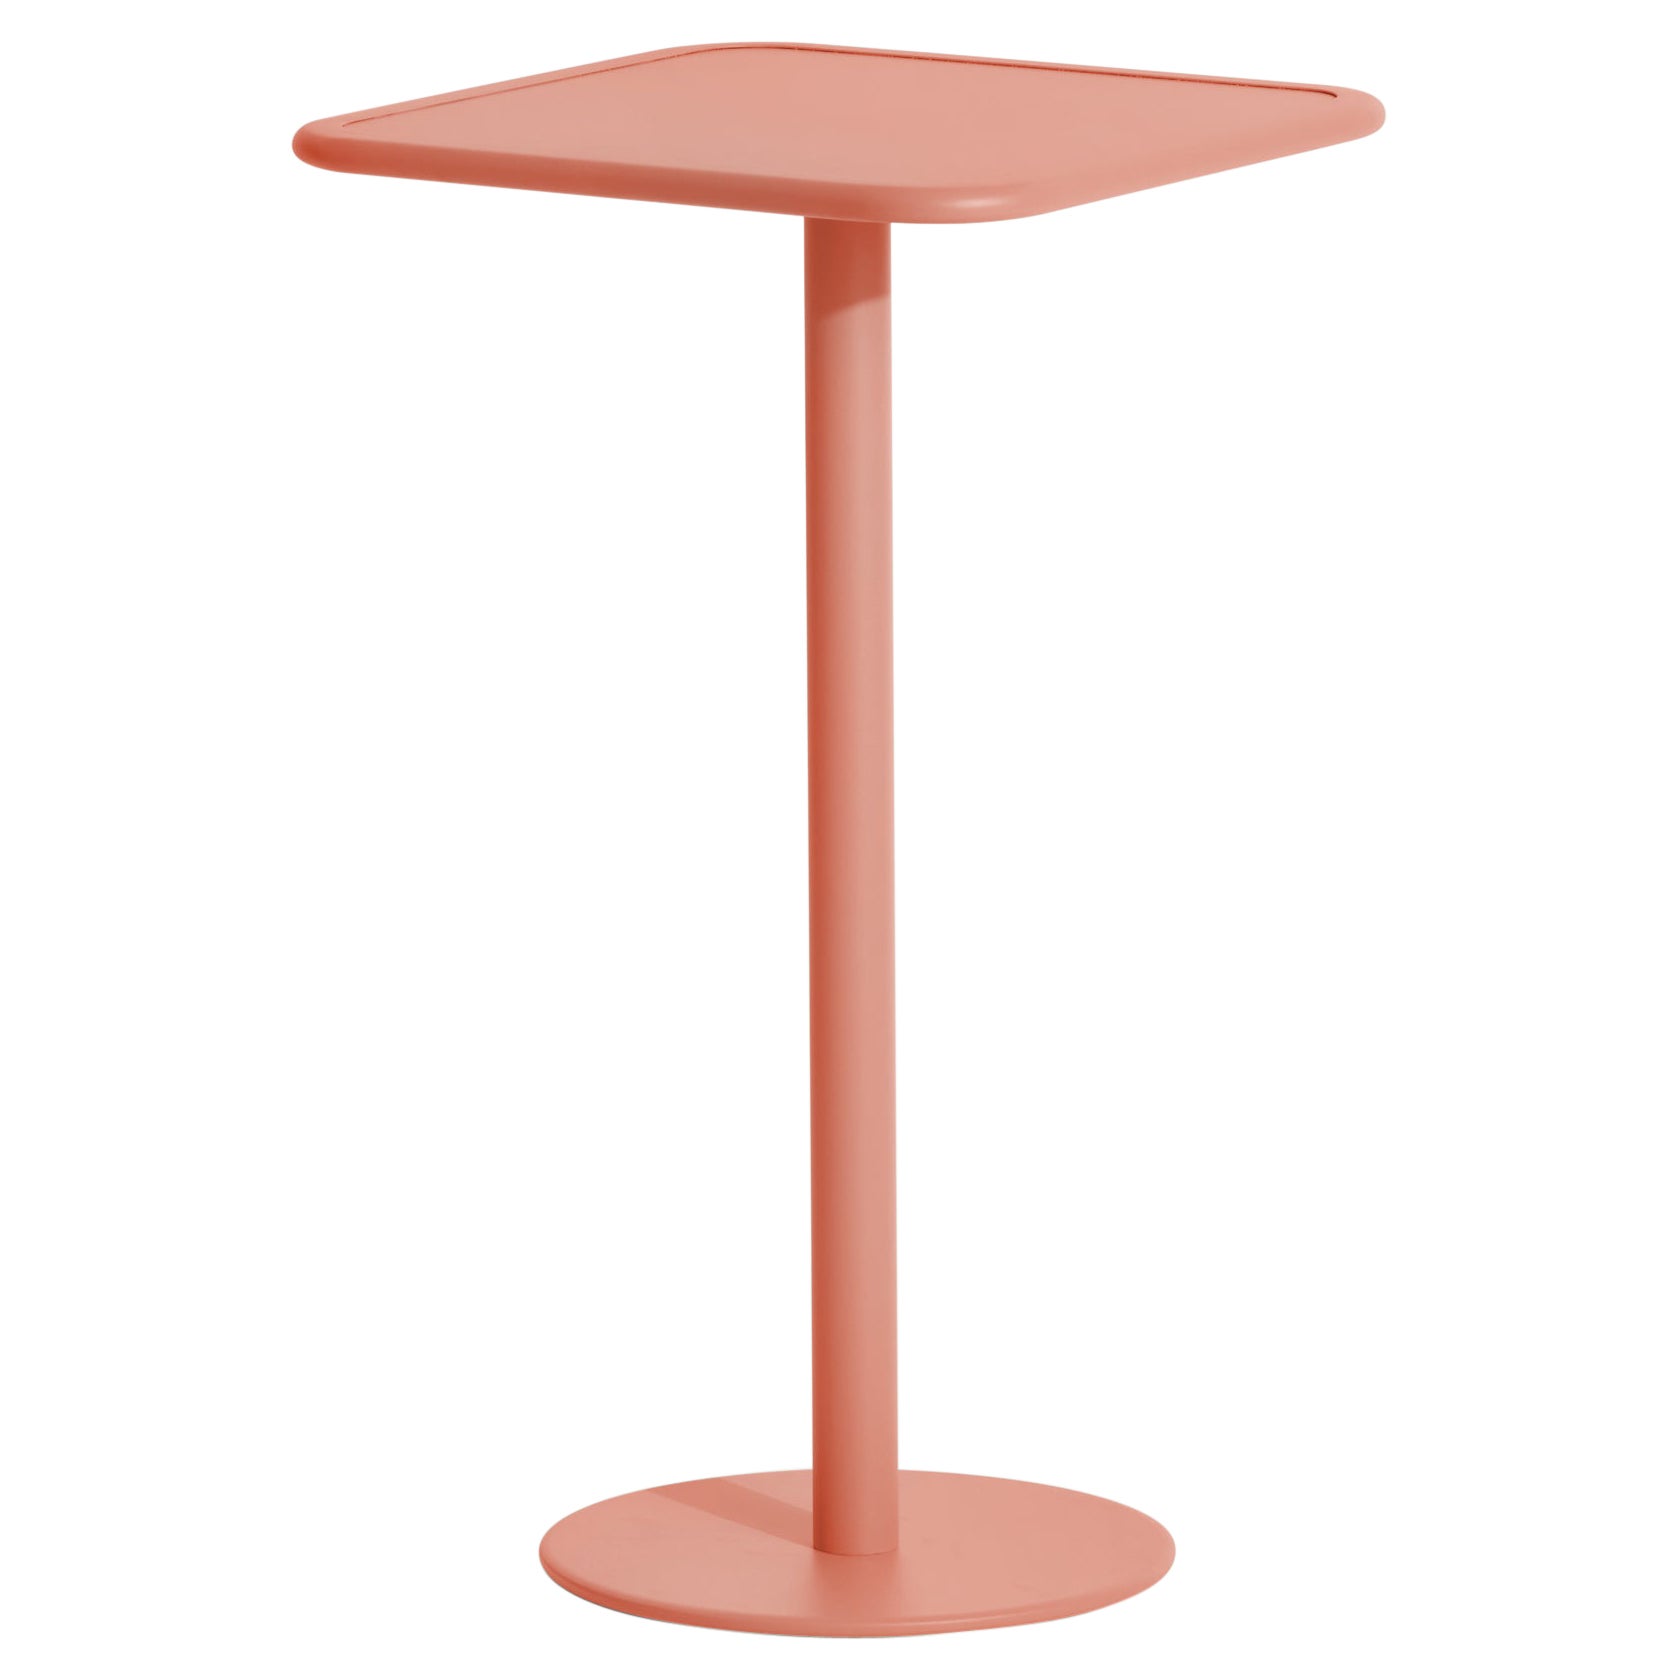 Petite Friture Week-End Square High Table in Coral Aluminium, 2017